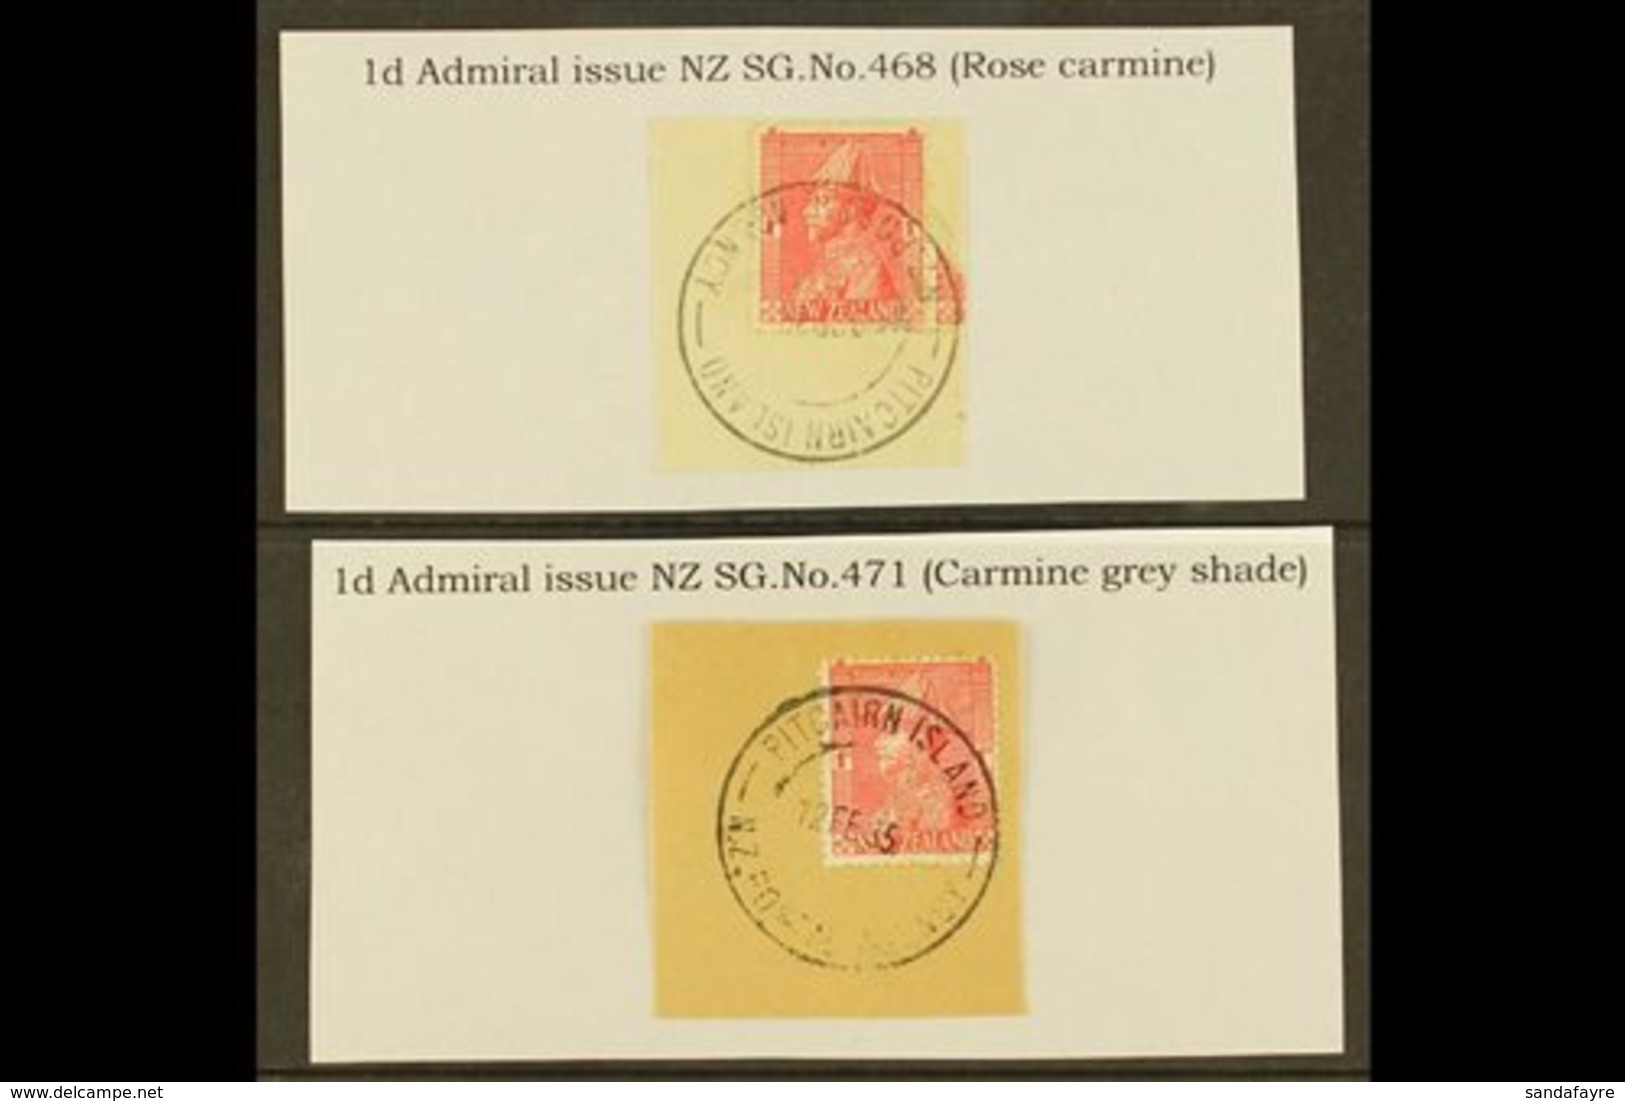 1926-27 1d Carmine "Admiral" Of New Zealand, Two Different Shades, Each On Piece Tied By Fine Full "PITCAIRN ISLANDS" Cd - Pitcairn Islands